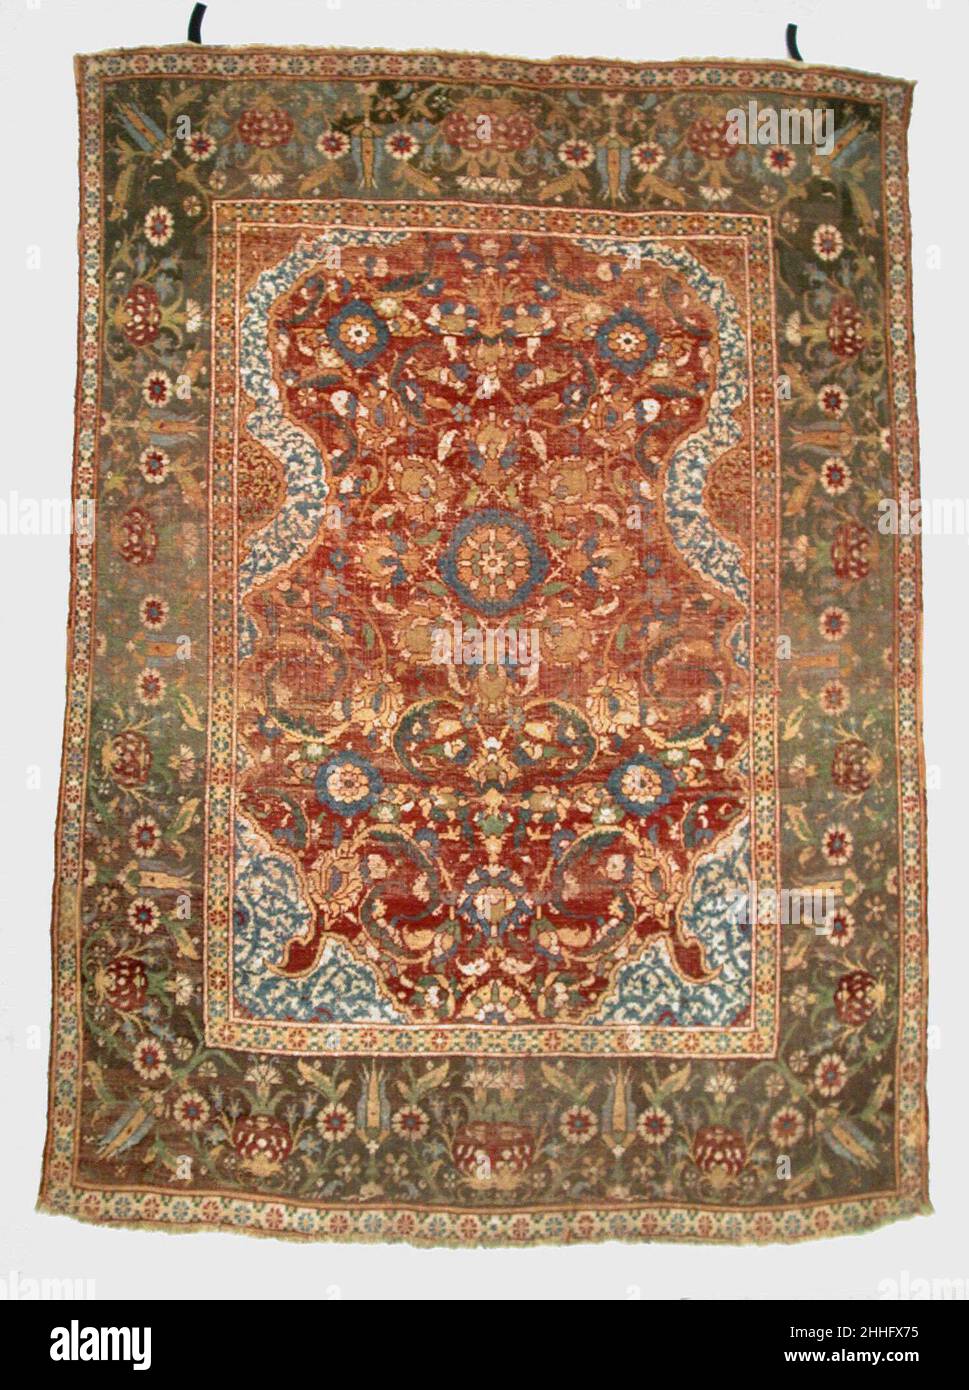 Carpet 17th century The scalloped horseshoe arch and overall floral field are characteristic of a small group of Ottoman rugs. Some, with all-wool construction, are thought to come from Cairo, a well-established rug-weaving center when it was conquered by the Ottomans in 1517. While continuing the use of the Senneh or Persian knot and limited palette of colors of the geometric patterned carpets made under Mamluk rule, the Cairo weavers employed totally Ottoman elements in their designs. In the center of the field is a configuration of a rosette type blossom surrounded by palmettes, a device wh Stock Photo